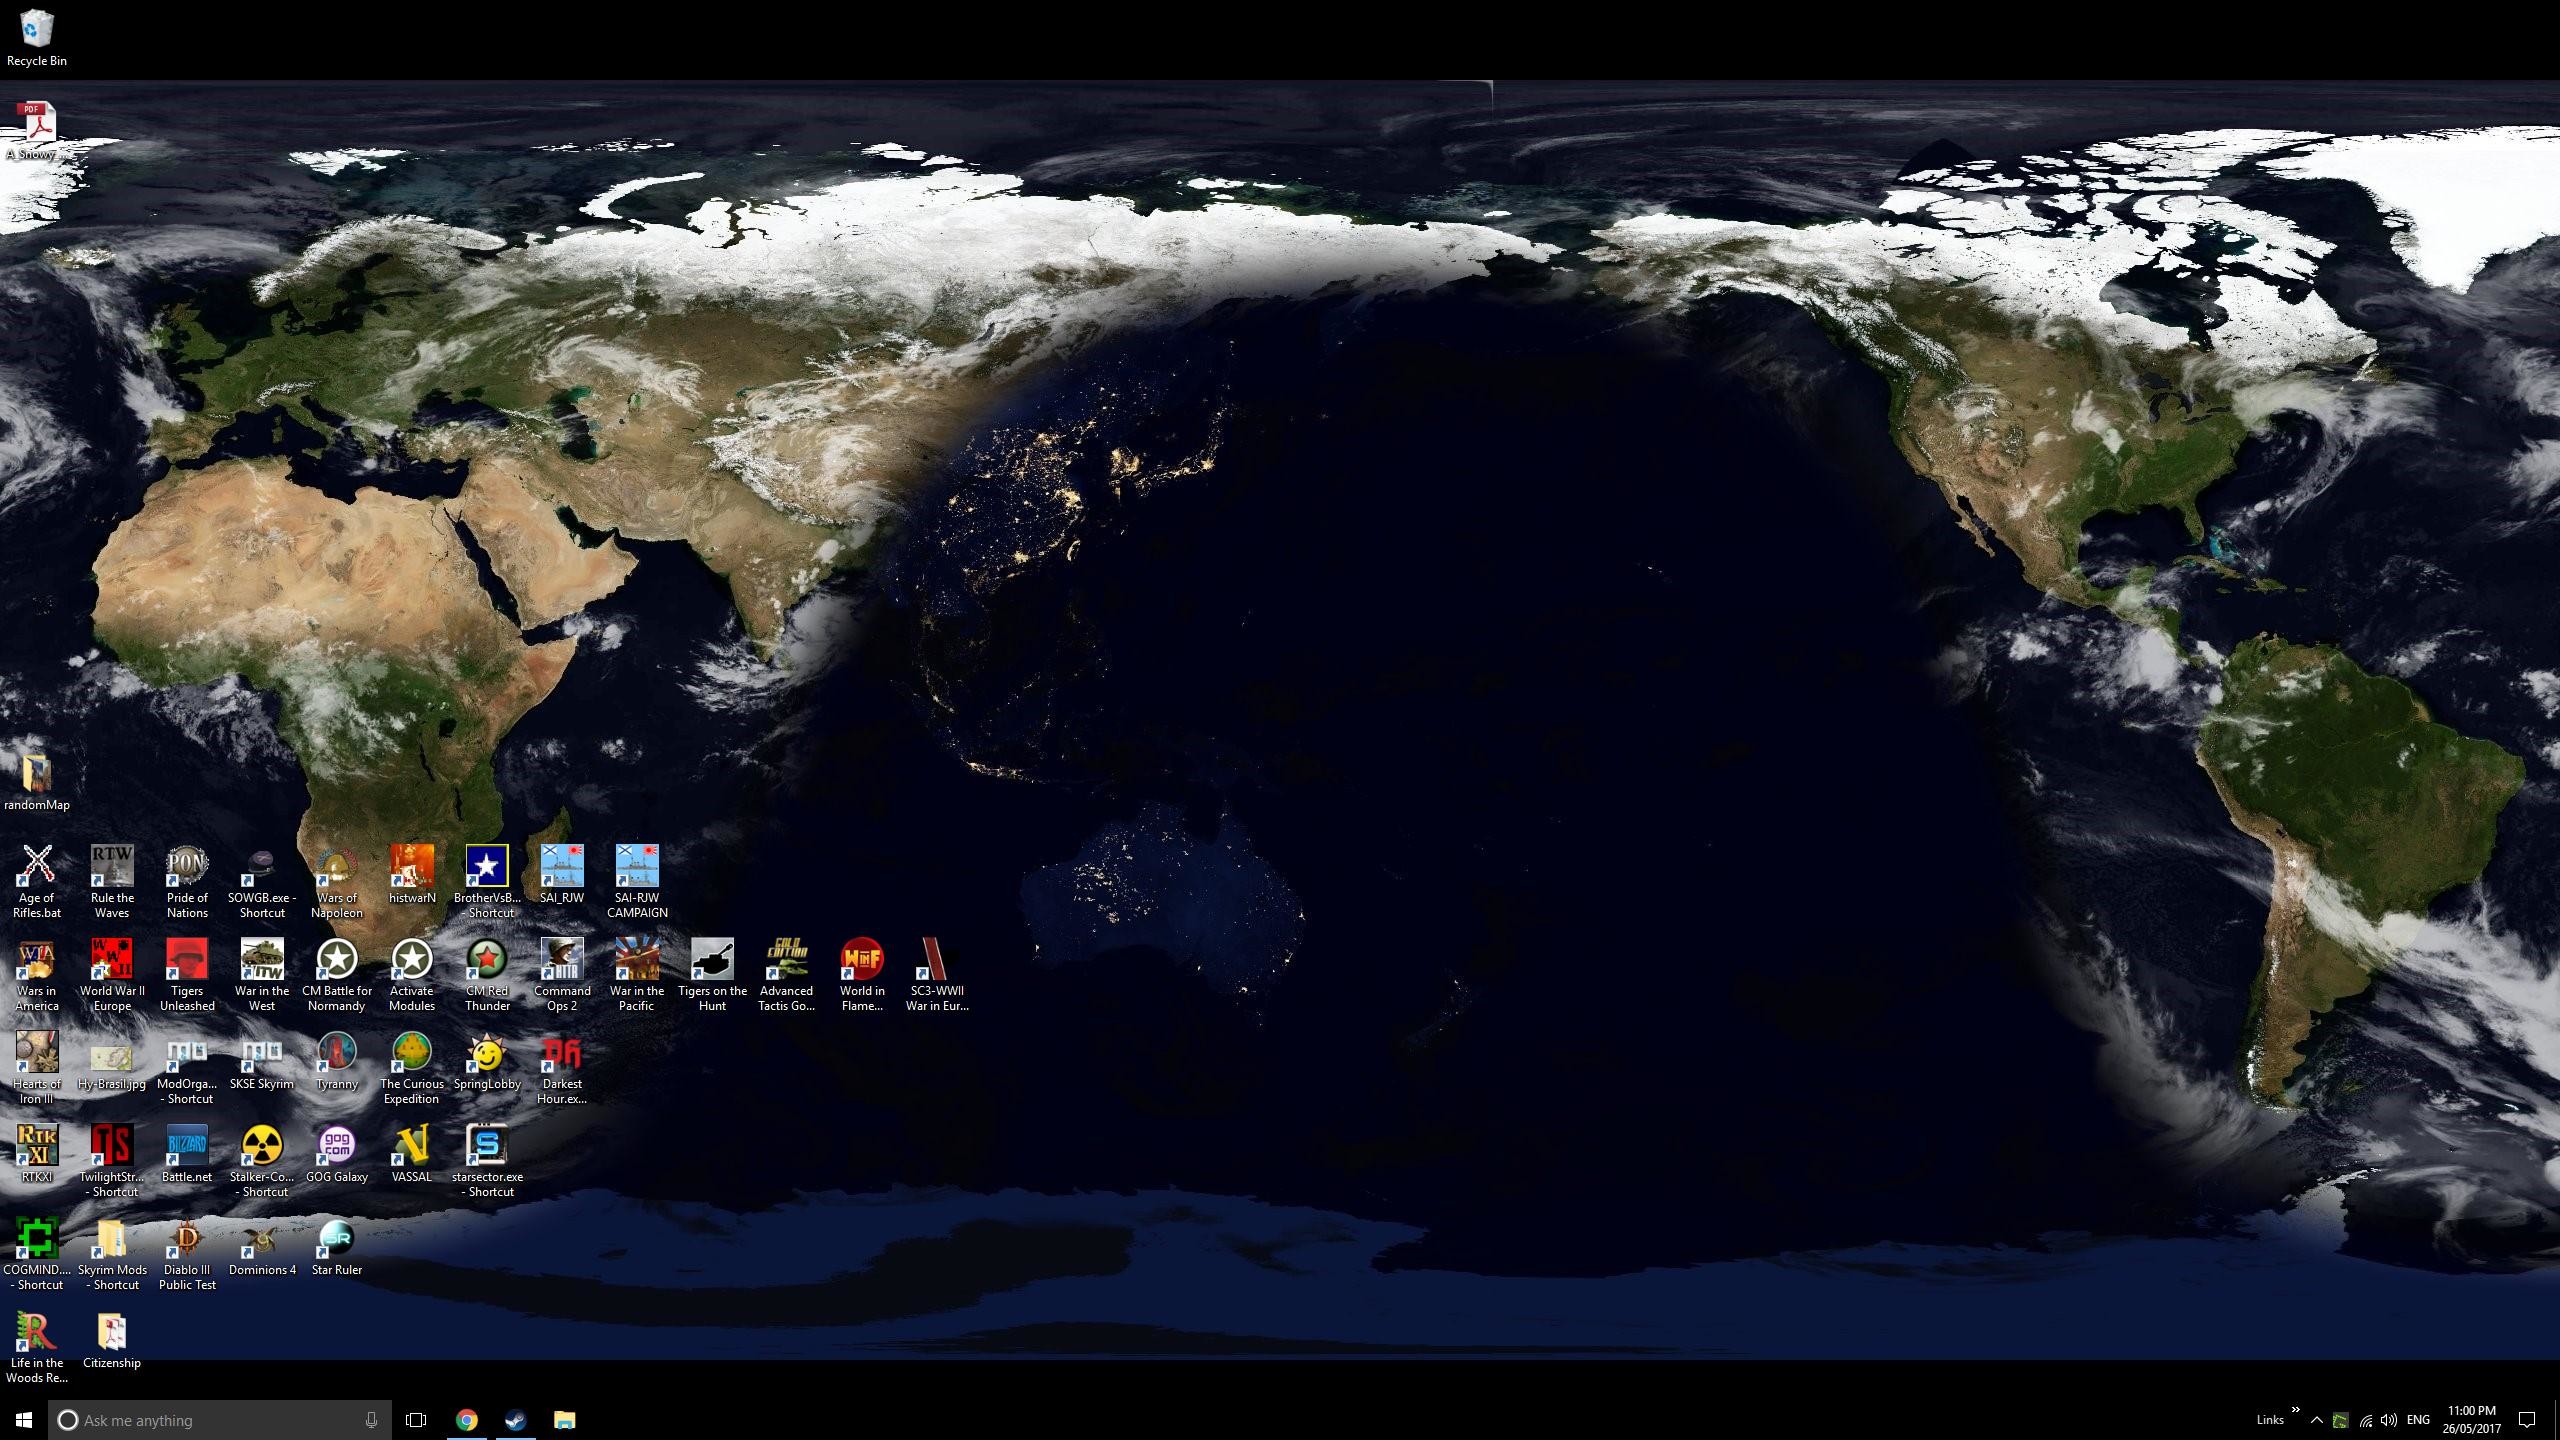 2560x1440 Desktop Earth is a wallpaper generator. It creates desktop backgrounds that  are accurate representations of the Earth. The imagery is based on NASA's  Blue ...